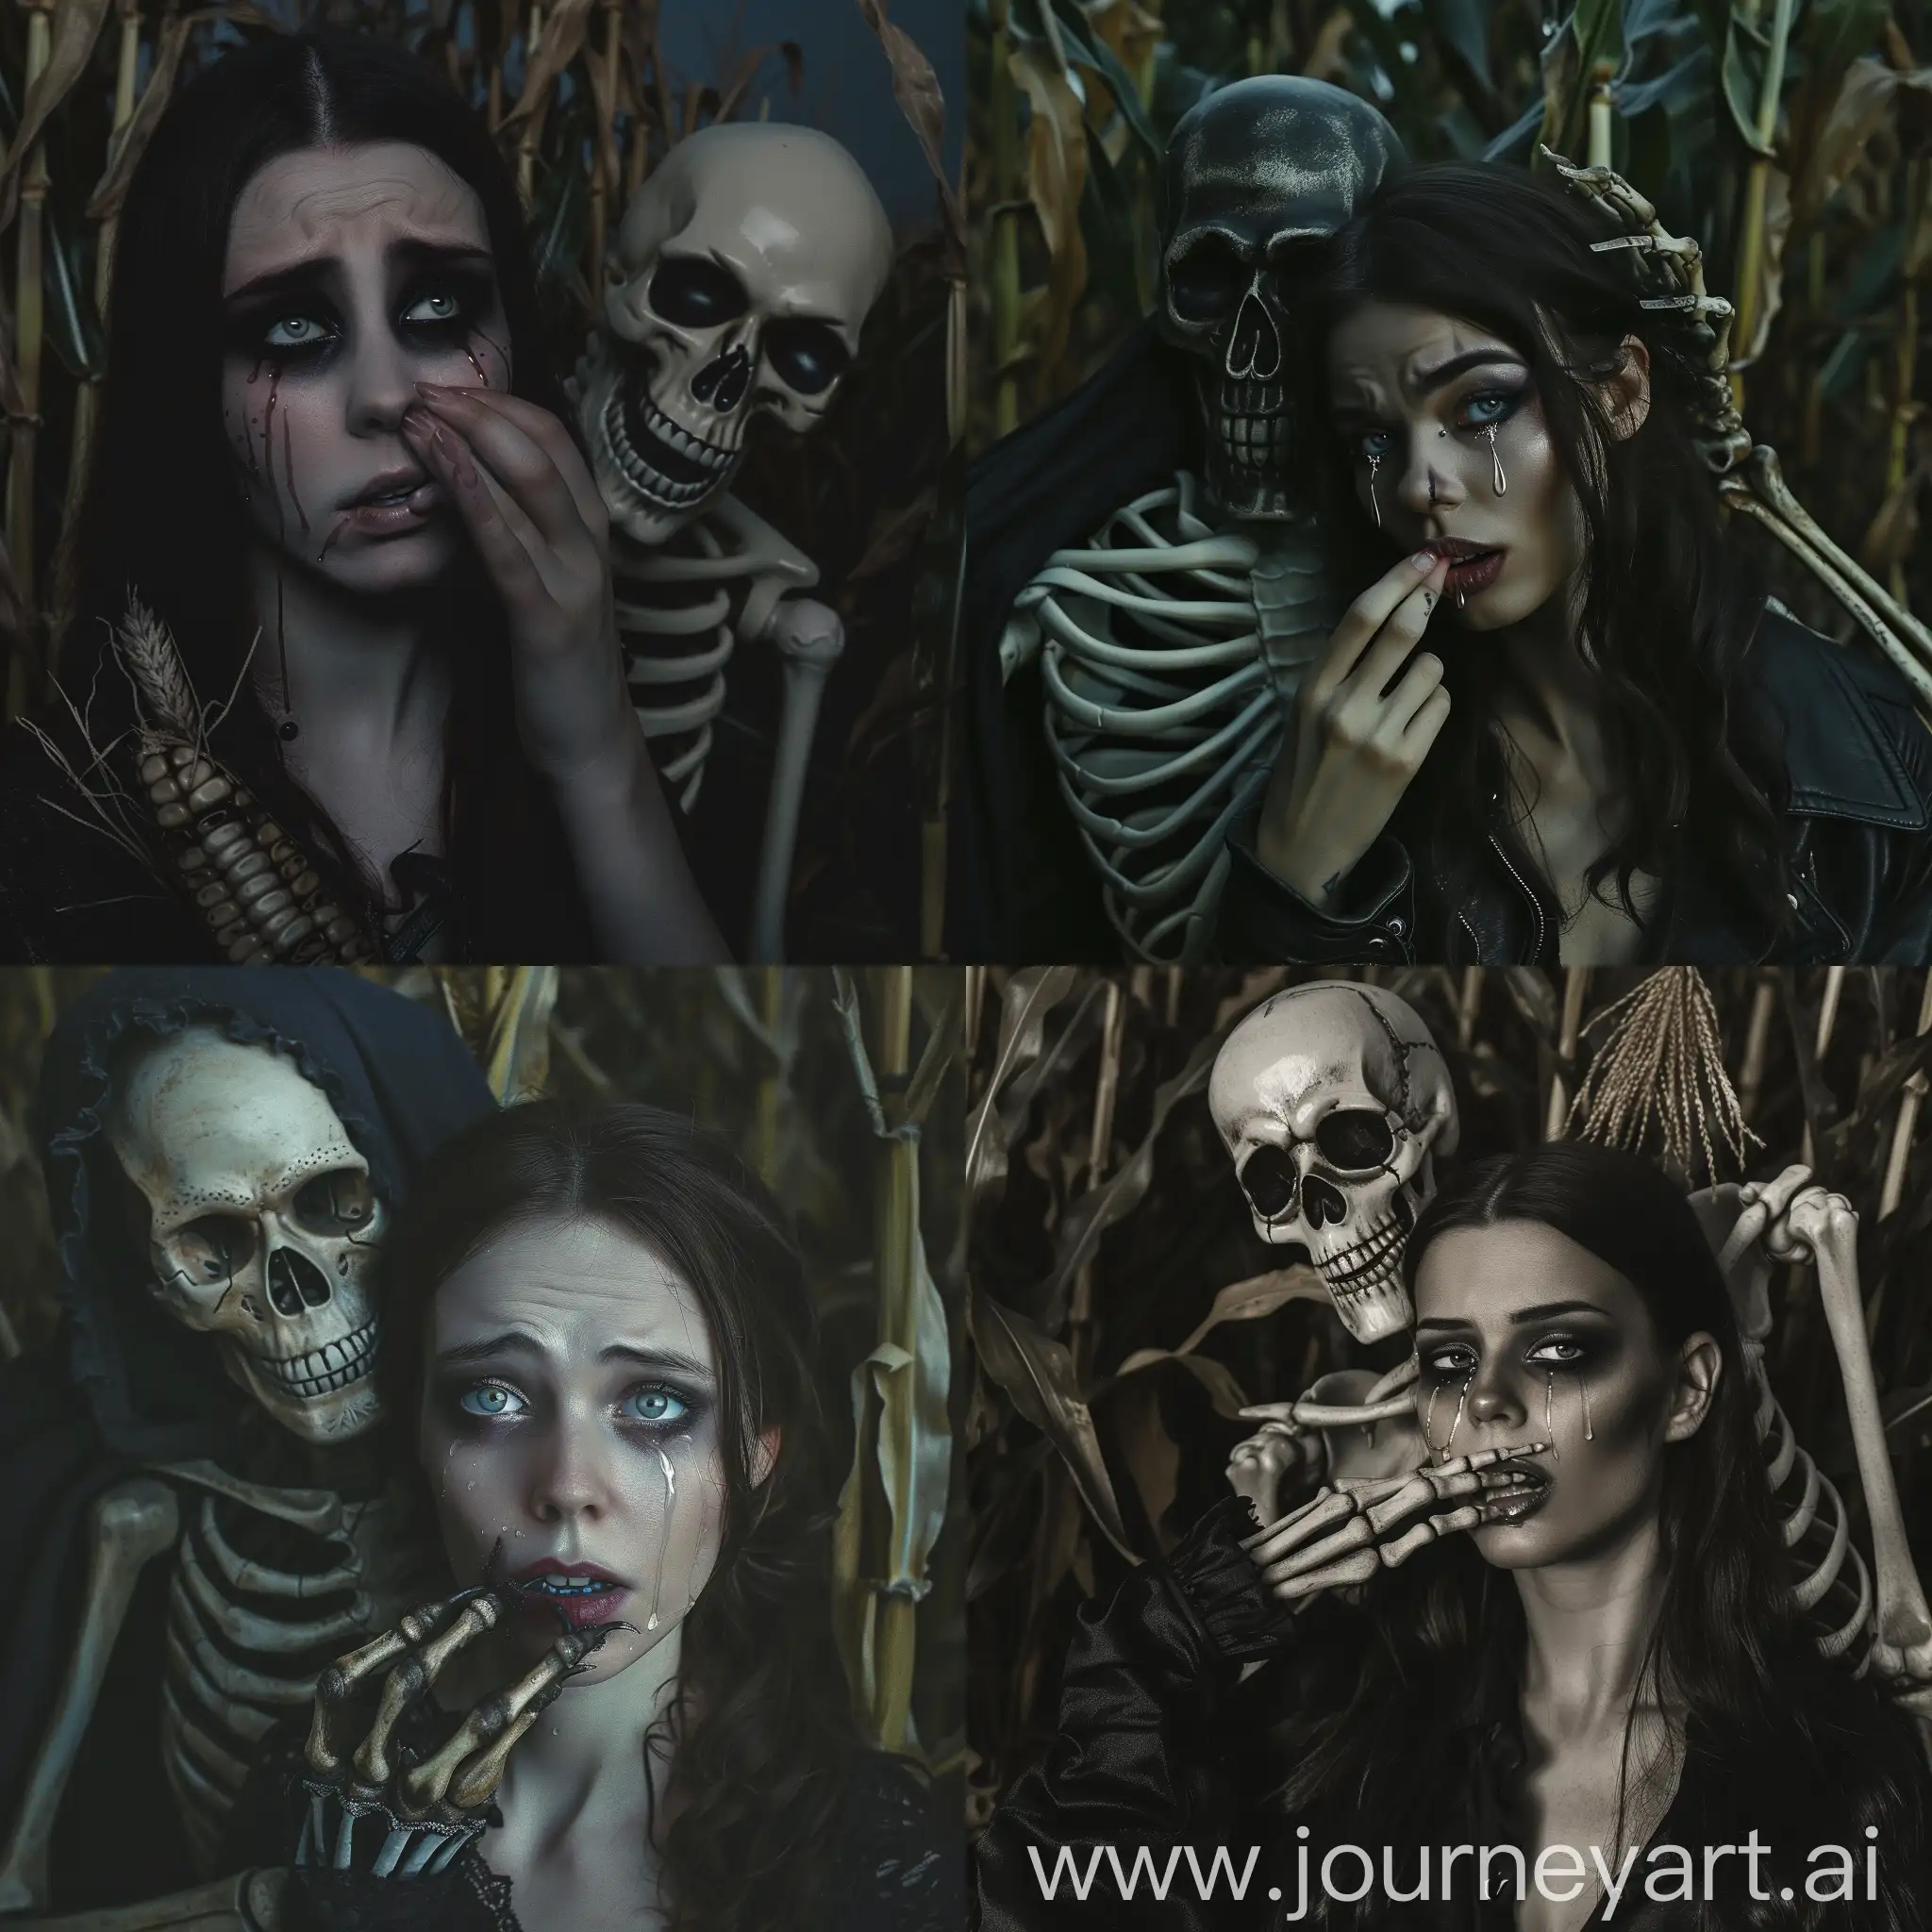 brunette woman with pale skin, tears on eyes, an evil skeleton behind her and closing the womans mouth with is skeleton hand, at dark corn field, midnight, darkness, night hour, dramatic noir, dark colors